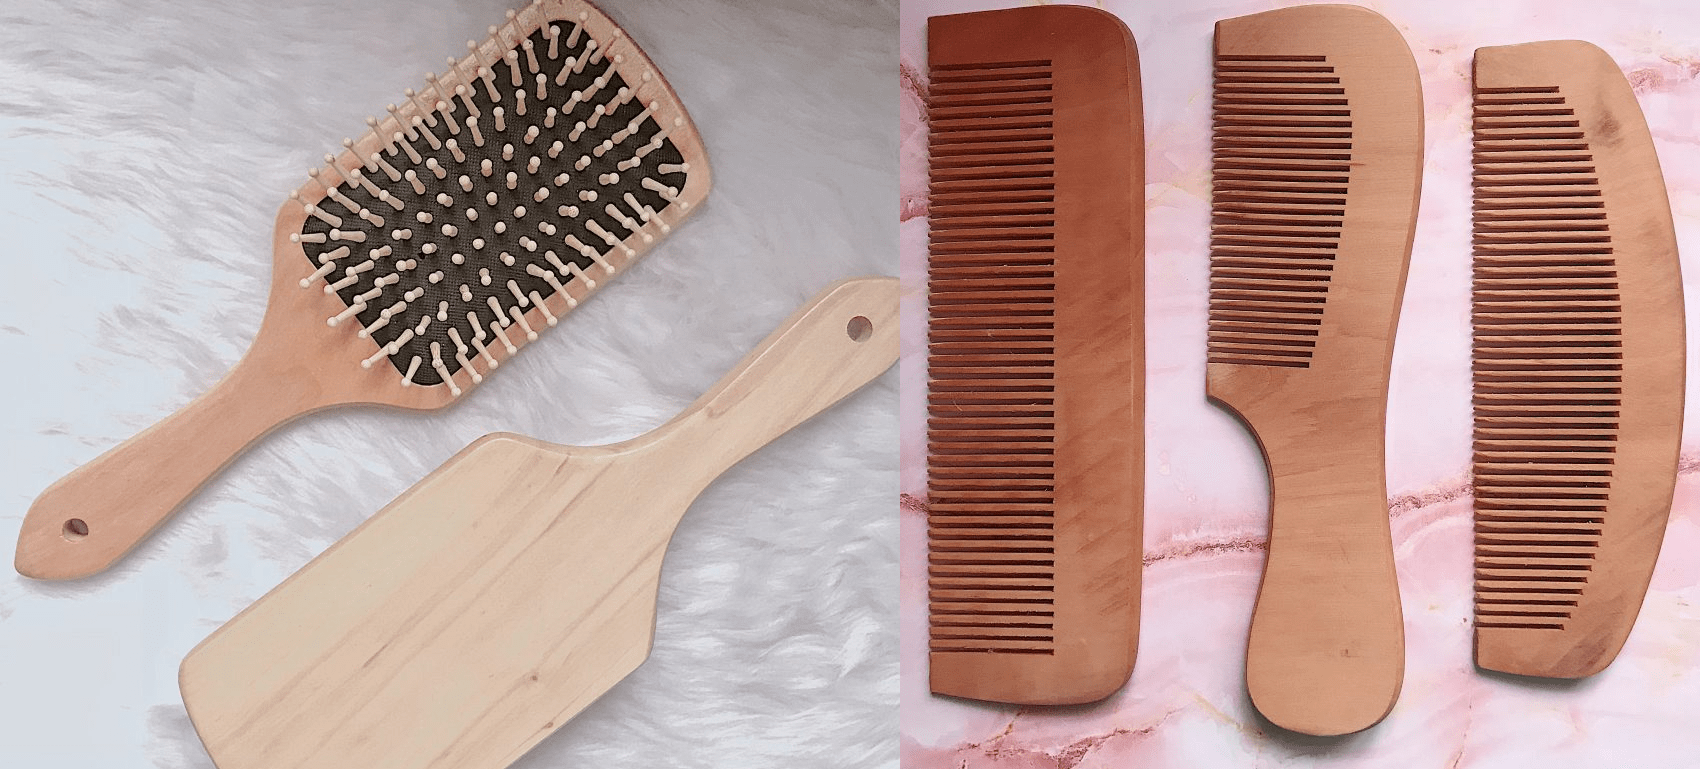 sustainable makeup and skincare - paraluman combs